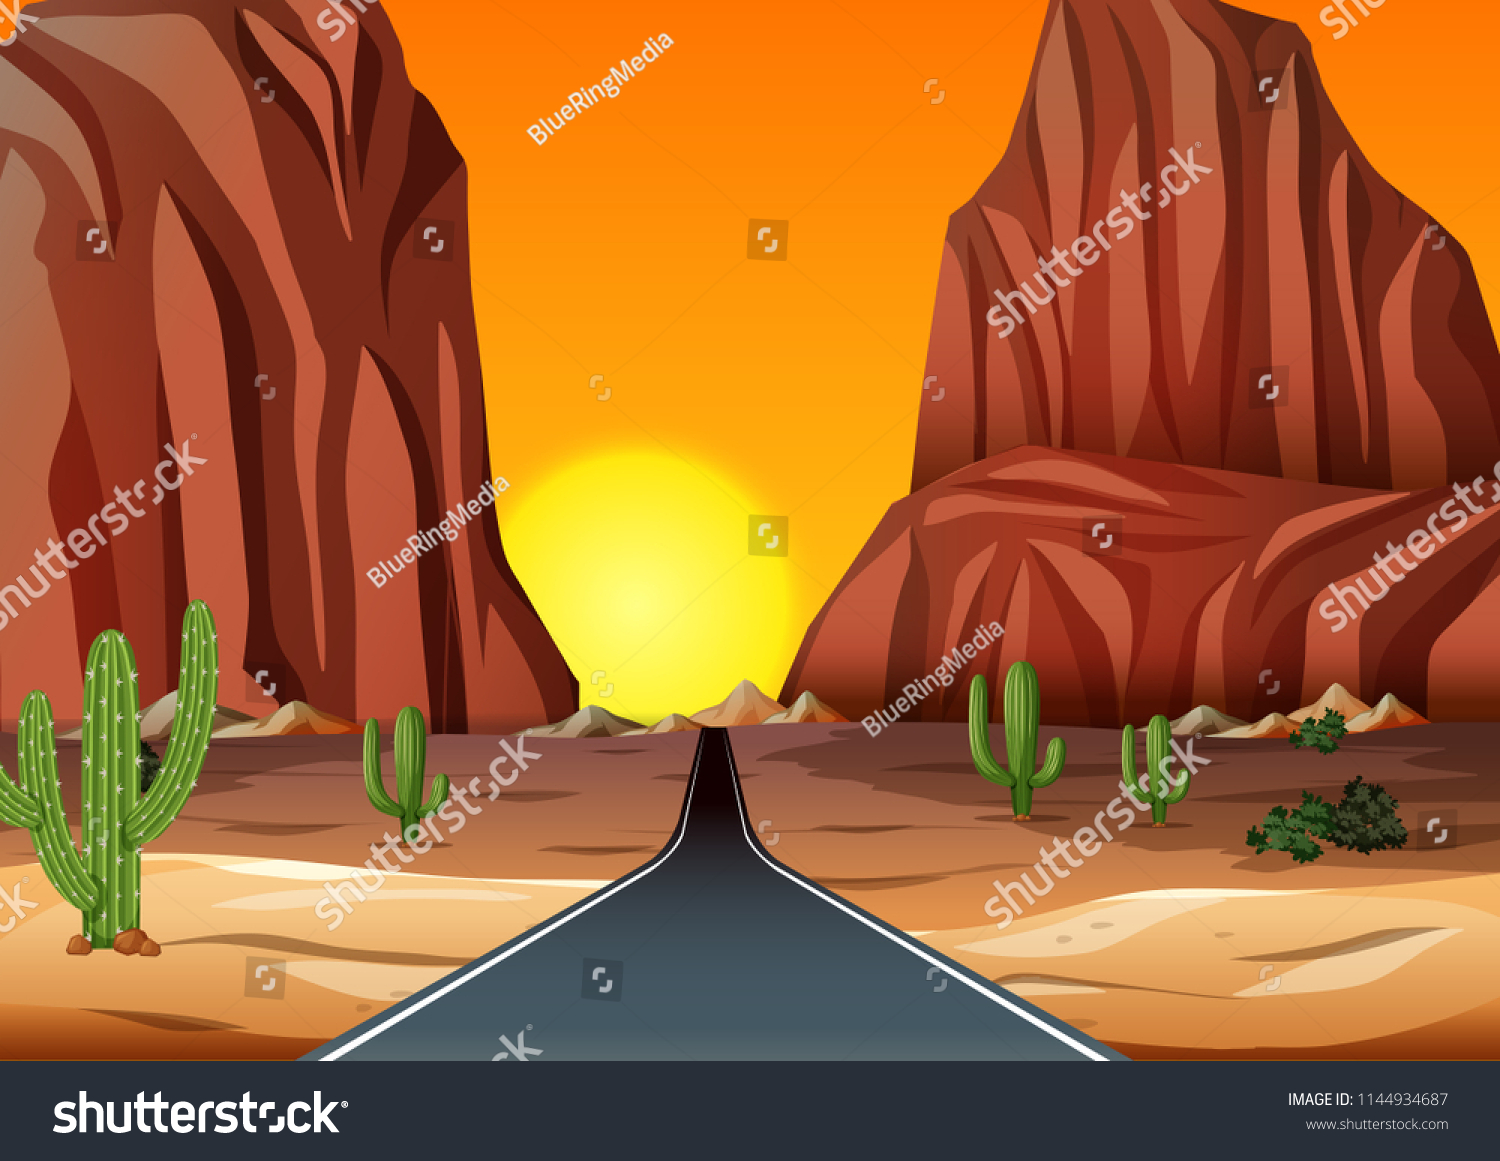 Sunset in the desert with road illustration #1144934687